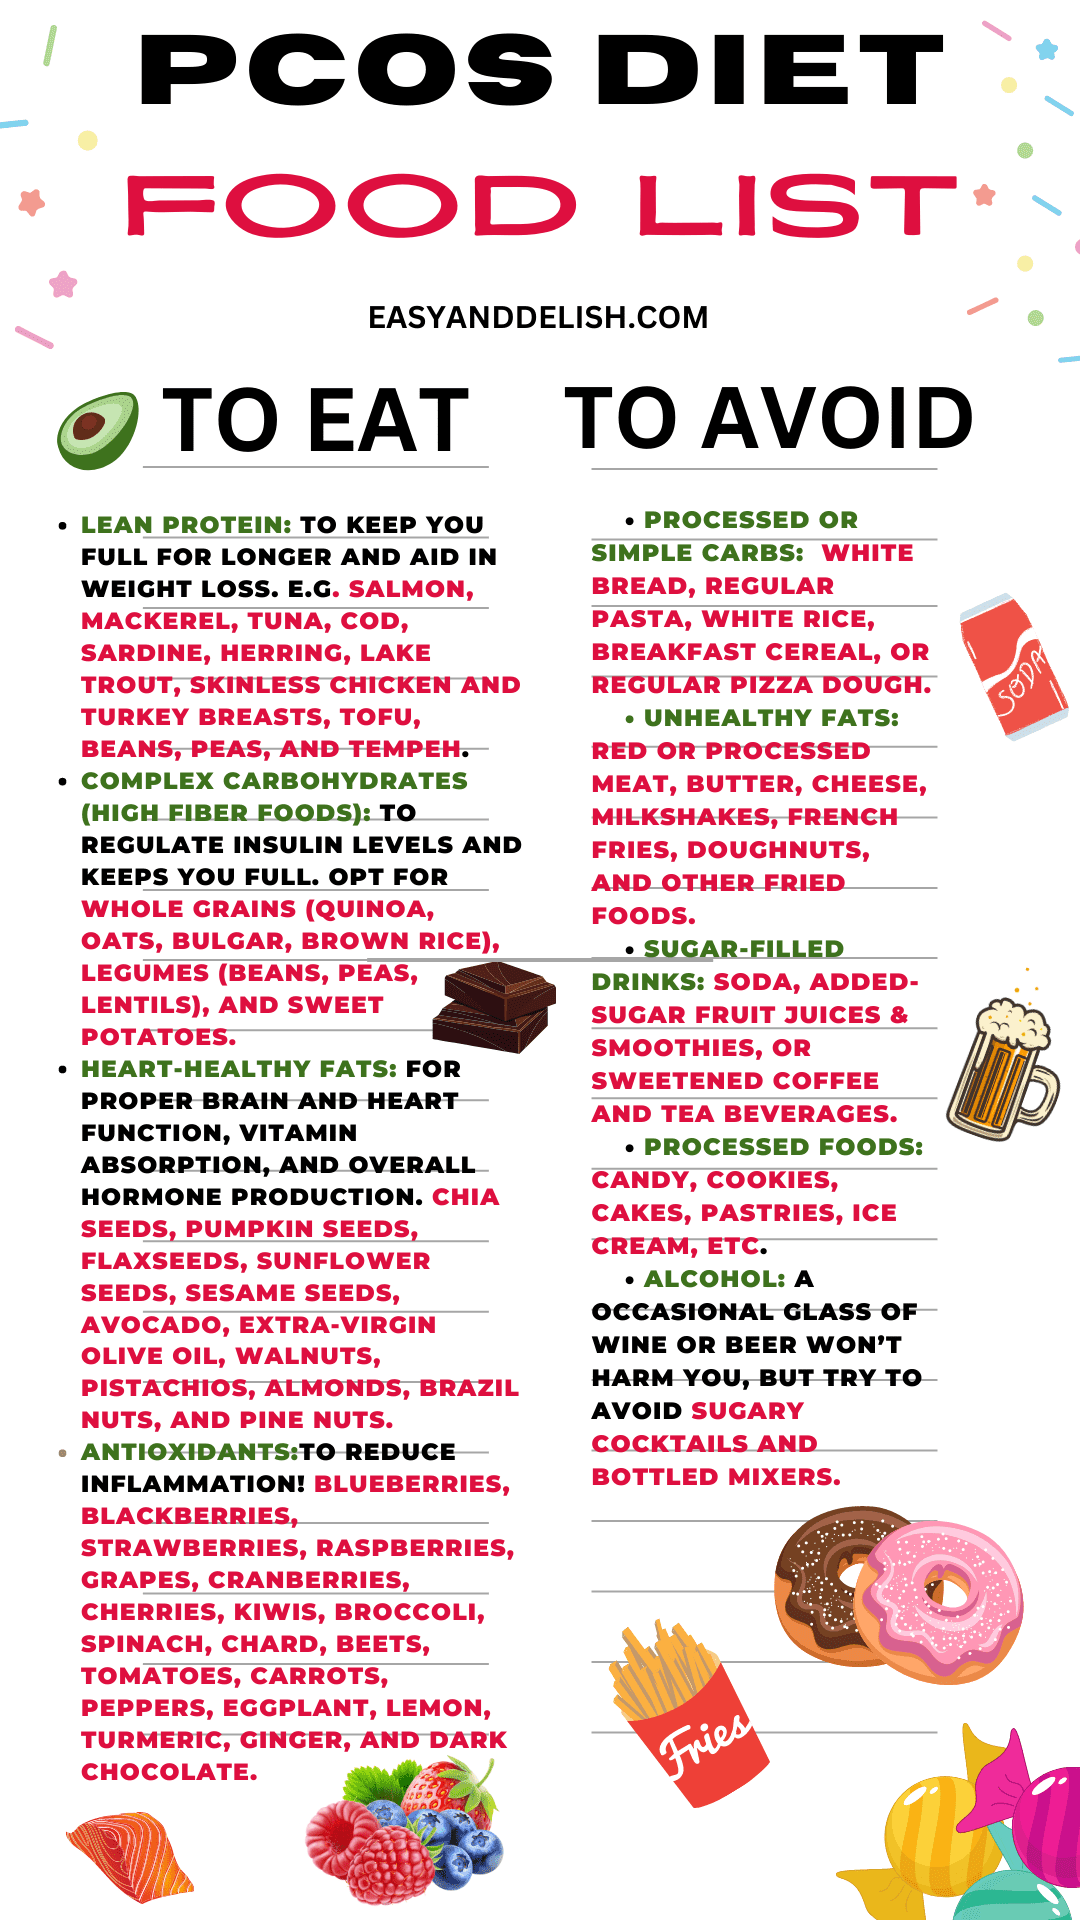 a pcos diet food list containing foods to eat and foods to avoid on that diet.